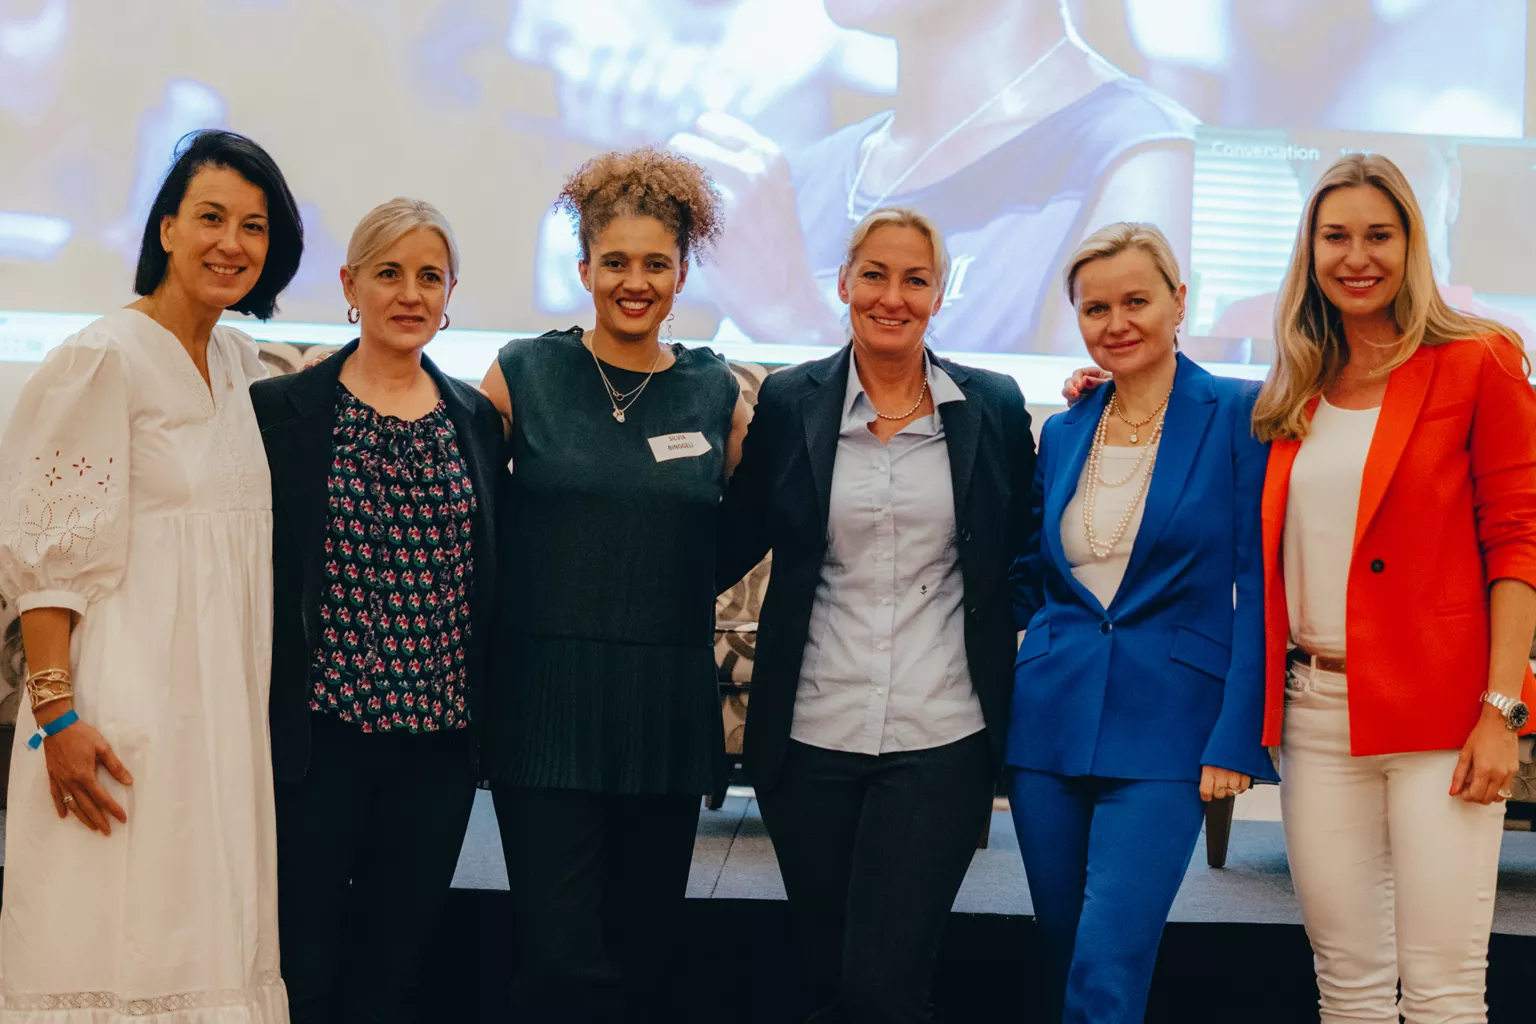 Group photo with Béatrice Lemberg, Hologic’s Senior Director of Surgical Marketing for EMEA and Canada, and other female leaders on a conference stage.